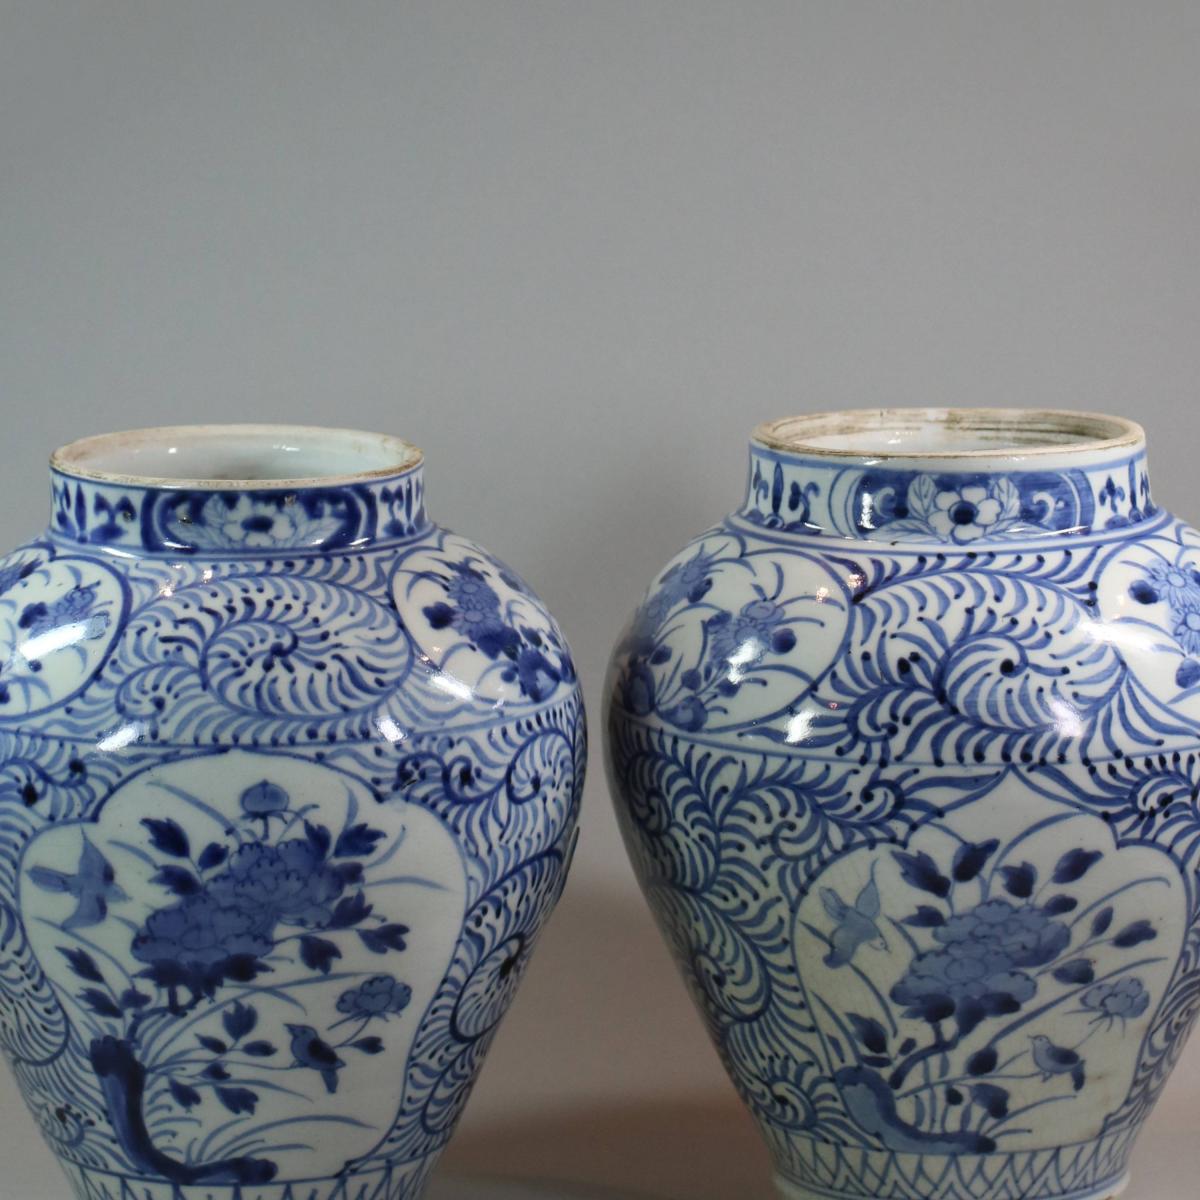 Pair of blue and white Japanese vases, circa 1700